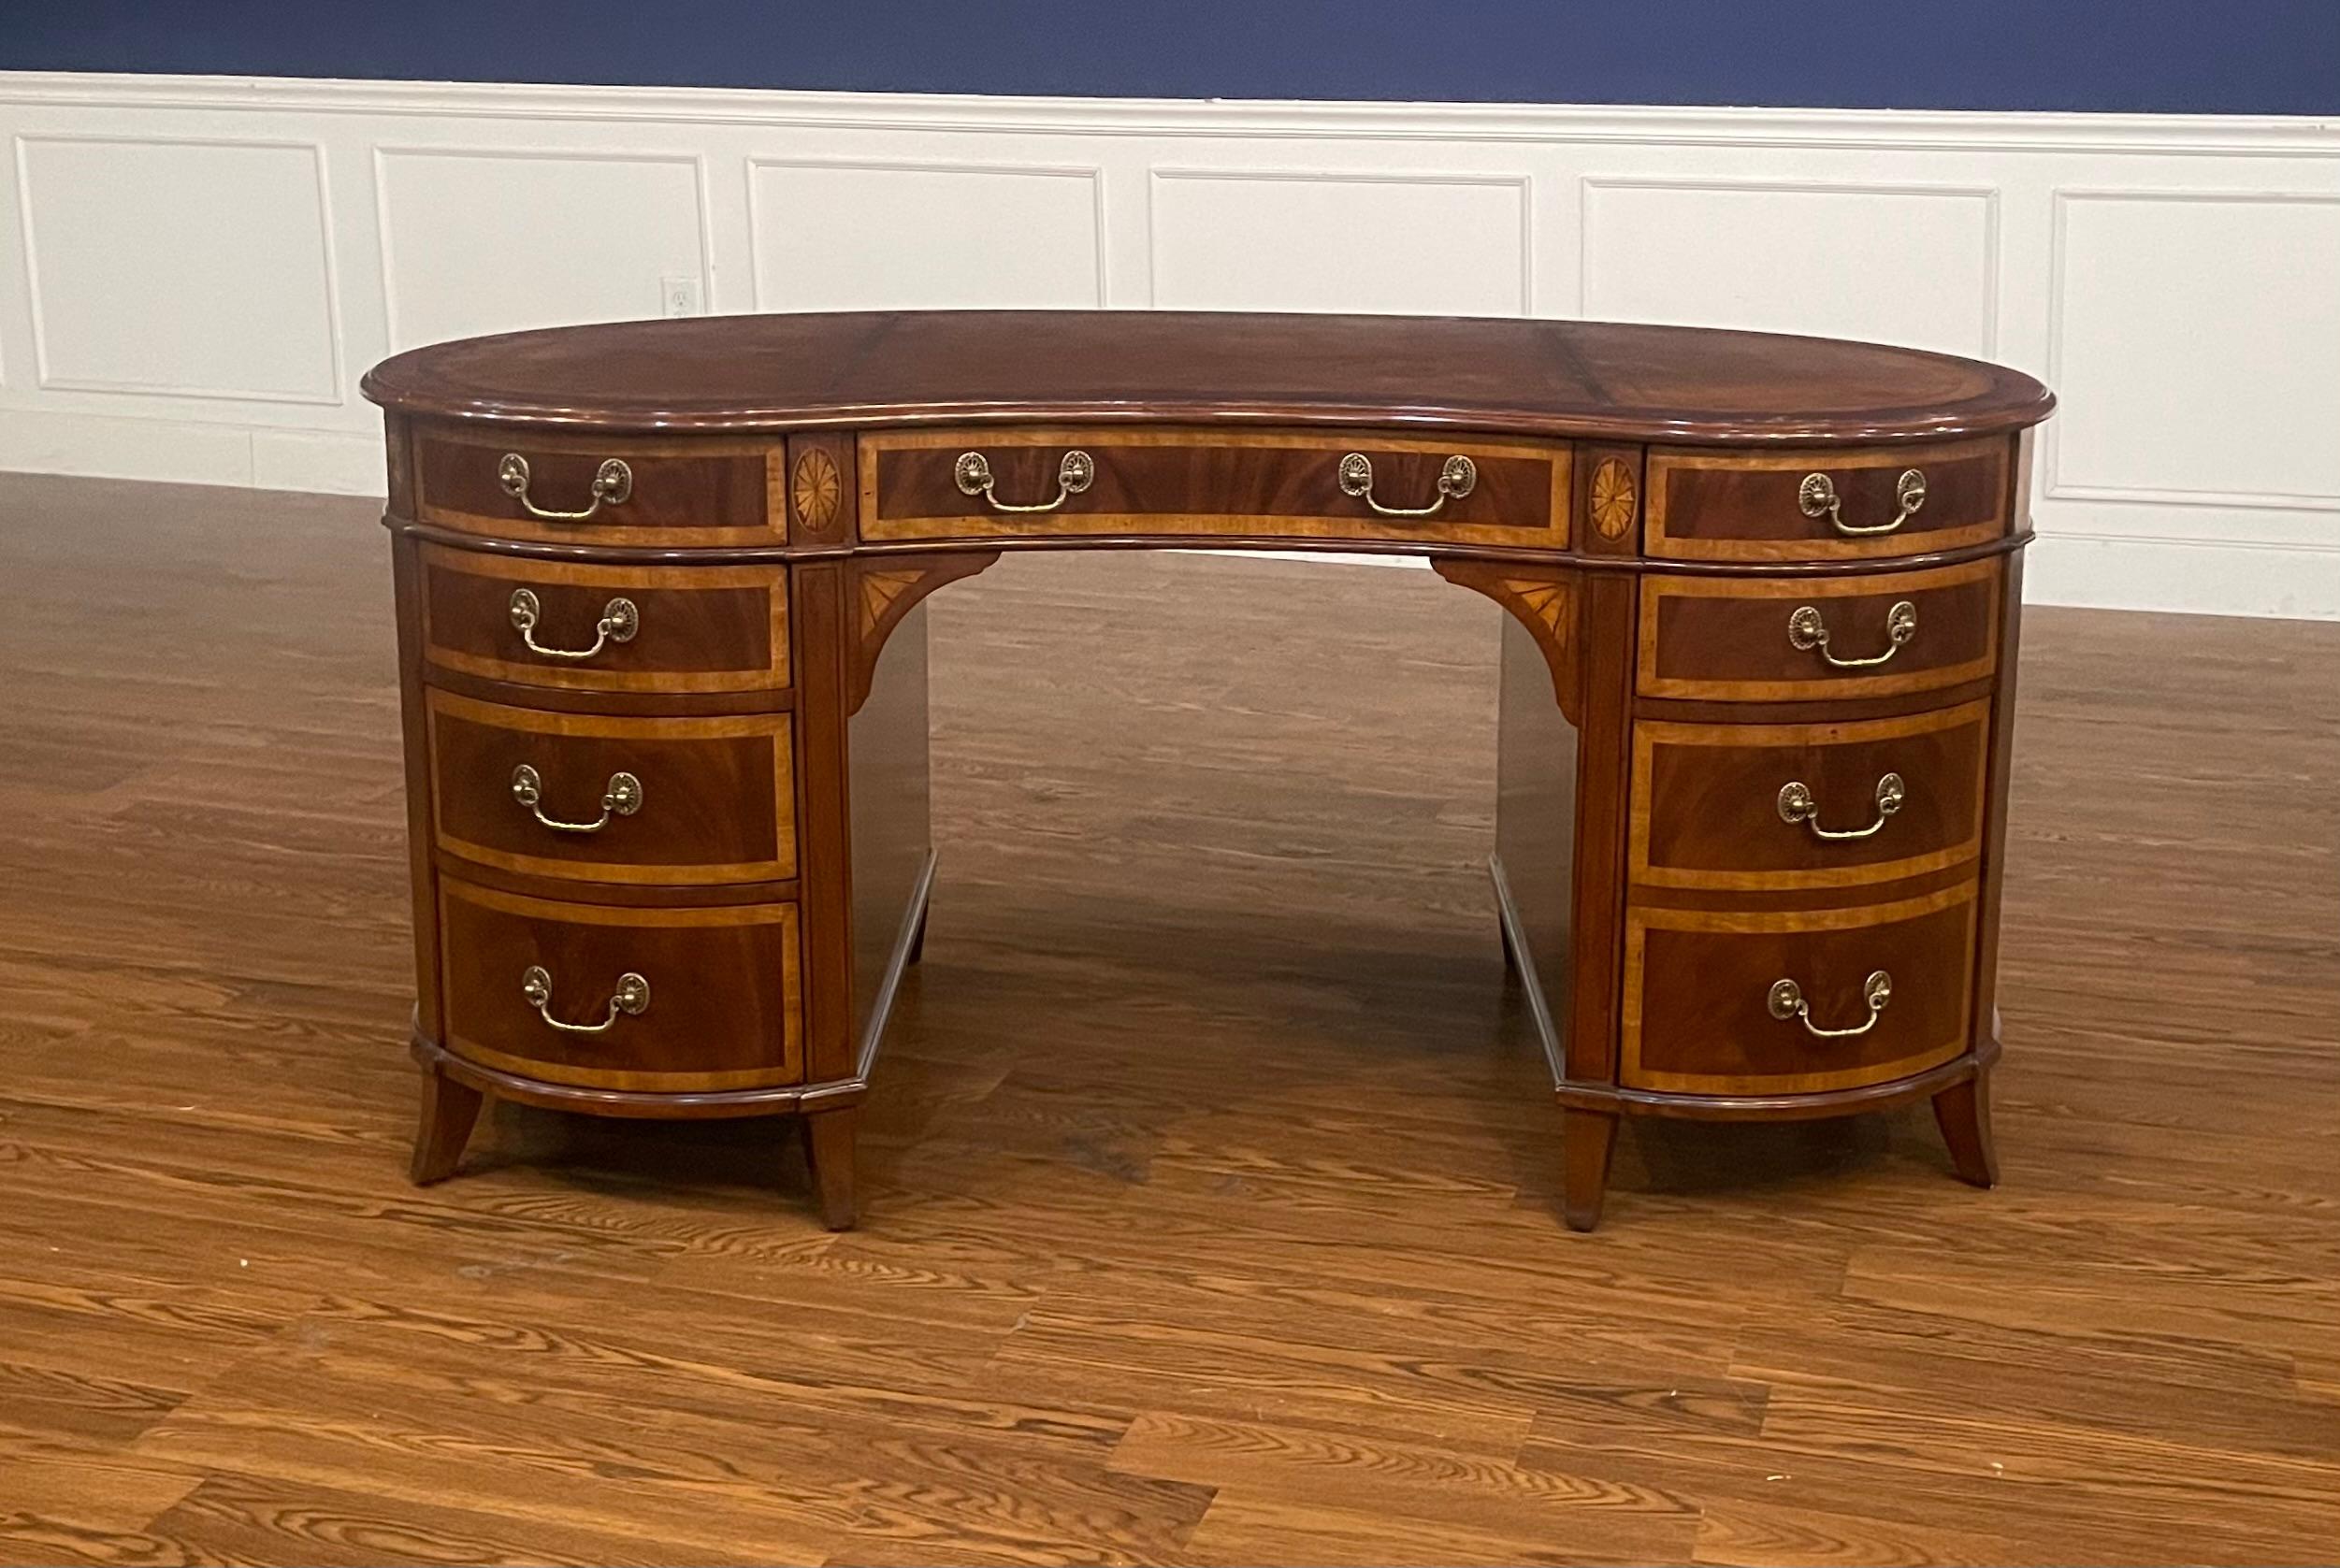 This is a new Hepplewhite style Kidney shaped writing desk. It is ideal for the home office, library, or reception area in a business setting. It features a top of brown leather with gold tooling. Its front, back and side panels and drawers have